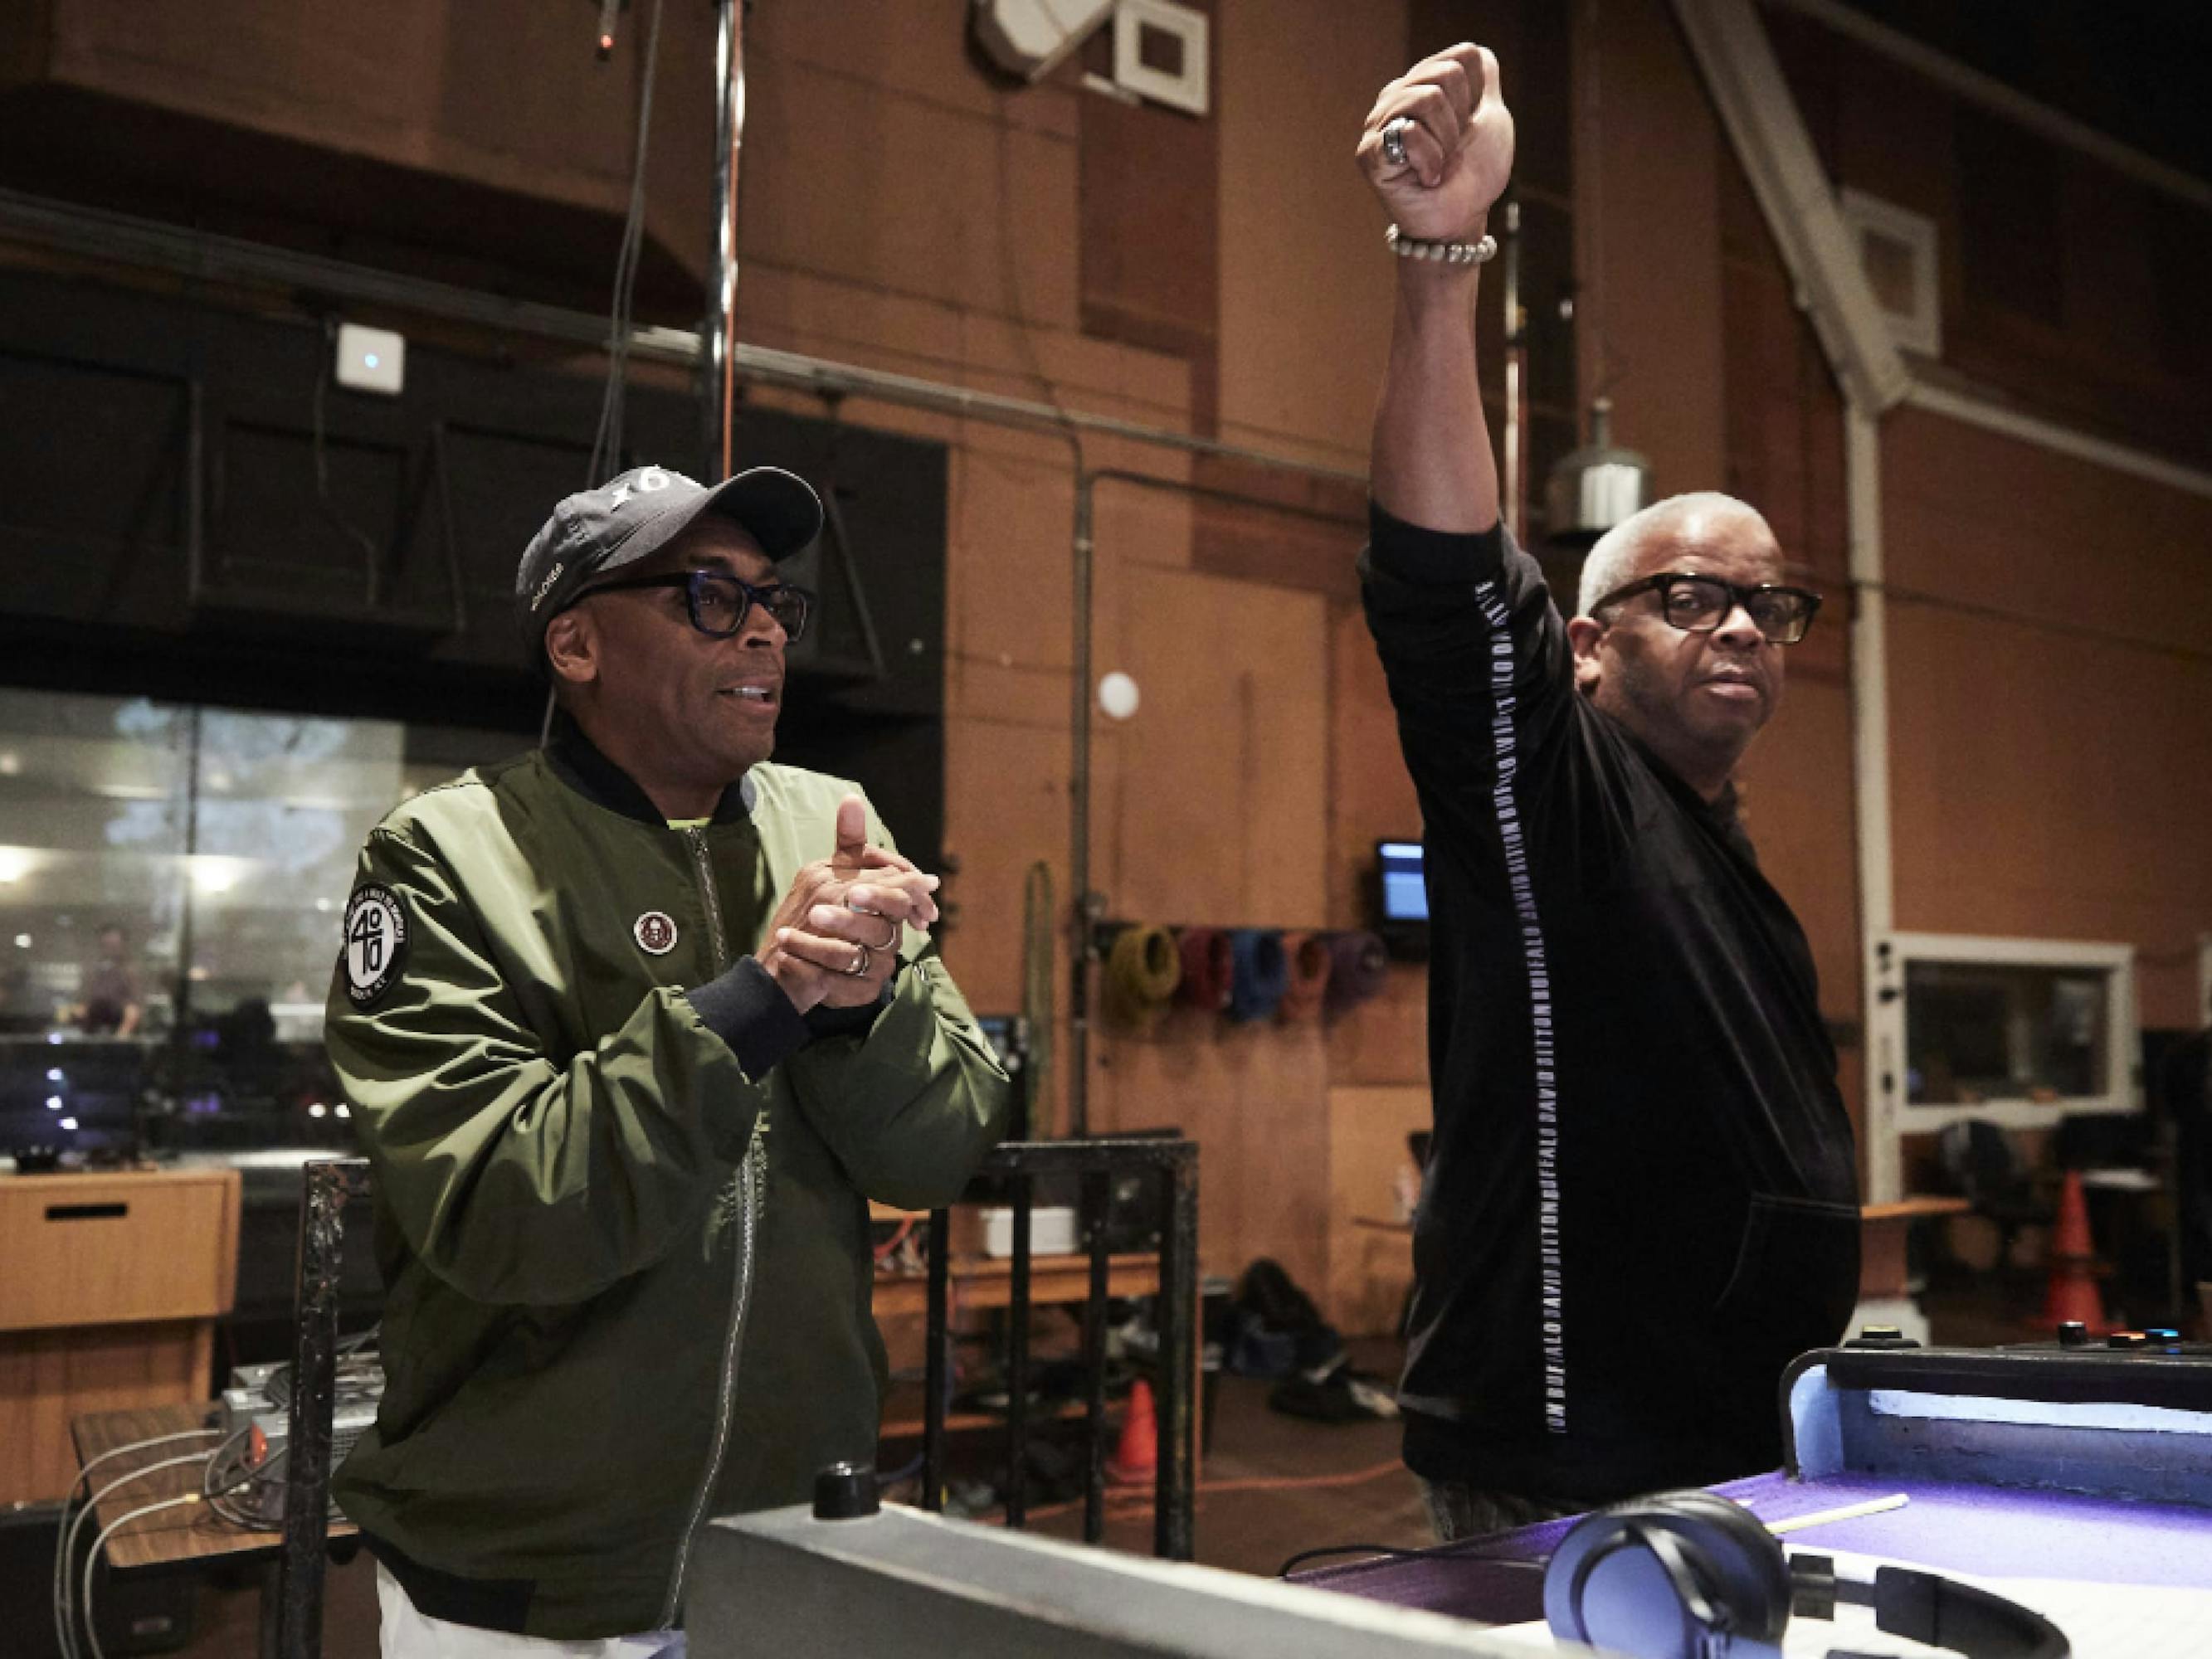 A photograph of Spike Lee and Terence Blanchard in the studio. The room is full of recording equipment. In the foreground is a pair of headphones. Lee has his hands clasped together and wears a black cap and green bomber jacket. Blanchard stands next to him, one fist raised in the air.